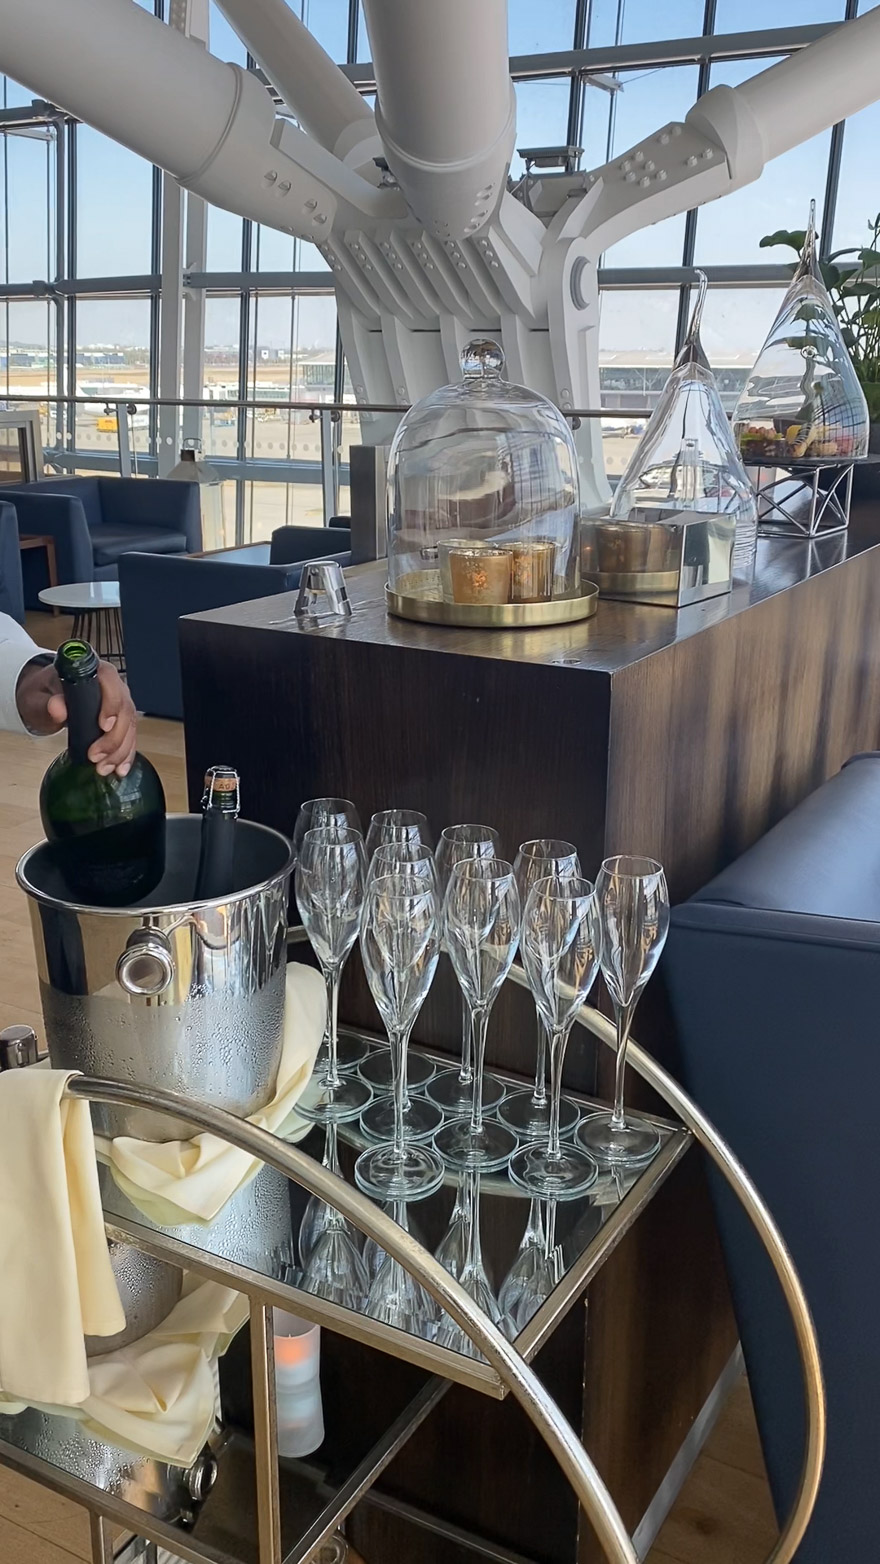 CCT 2 - REVIEW - British Airways : Galleries First Class Lounge & Concorde Terrace - London (LHR-T5) - [COVID-era]